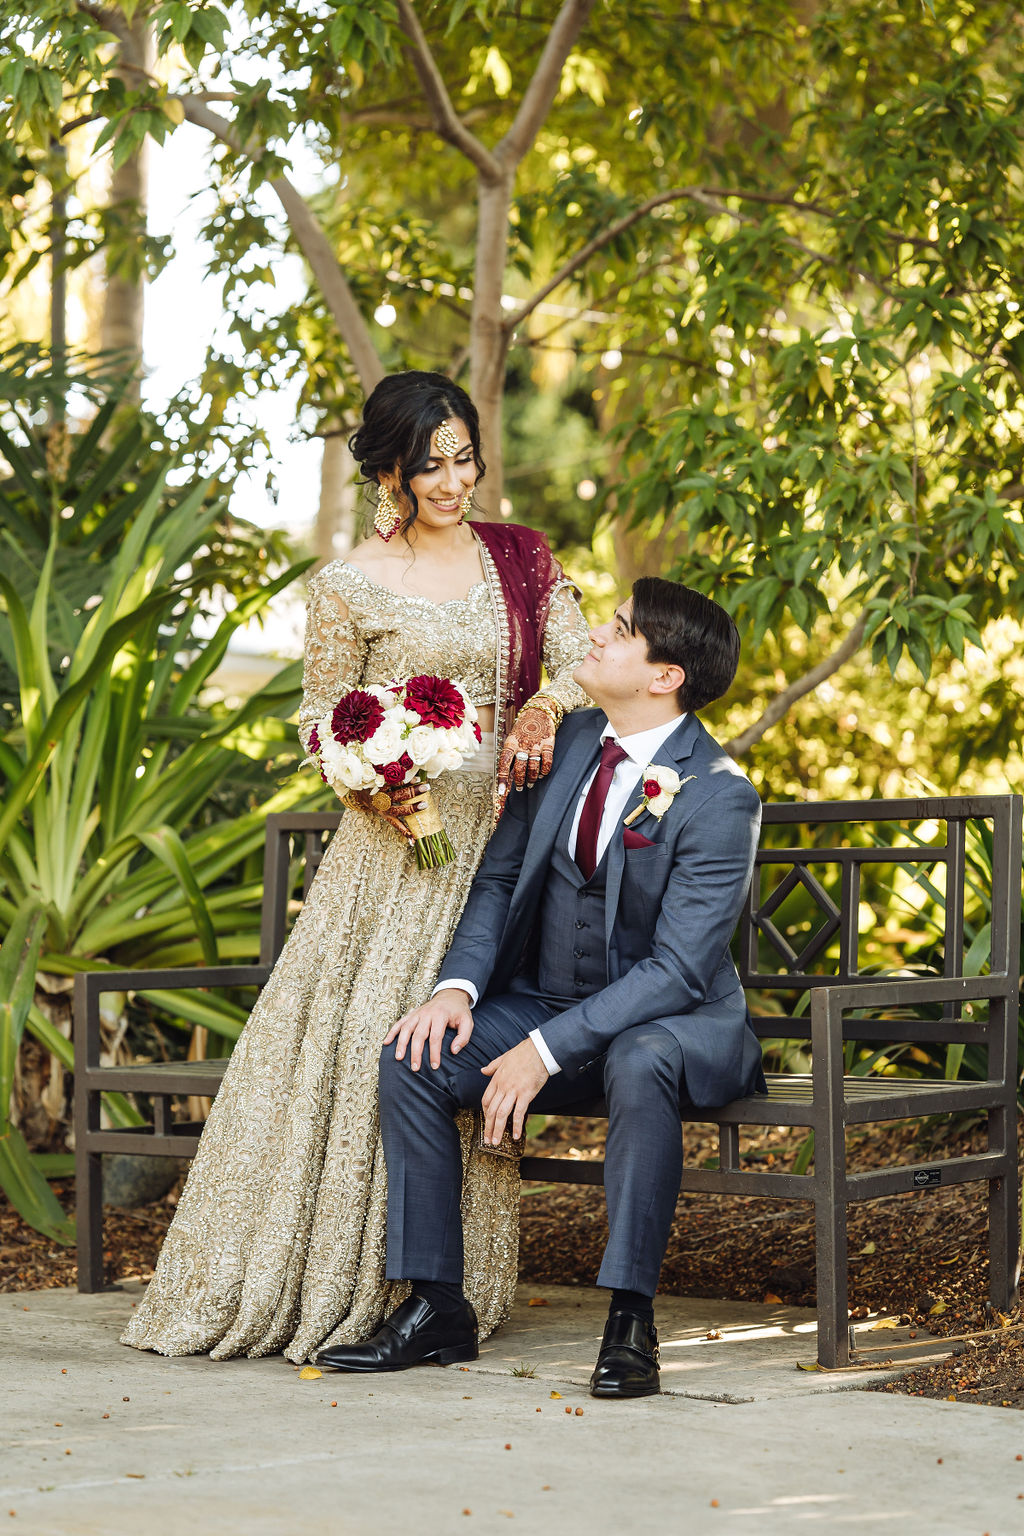 bride wearing embellished golden wedding saree and groom in dark grey suit with maroon at Los Angeles River and Garden Center